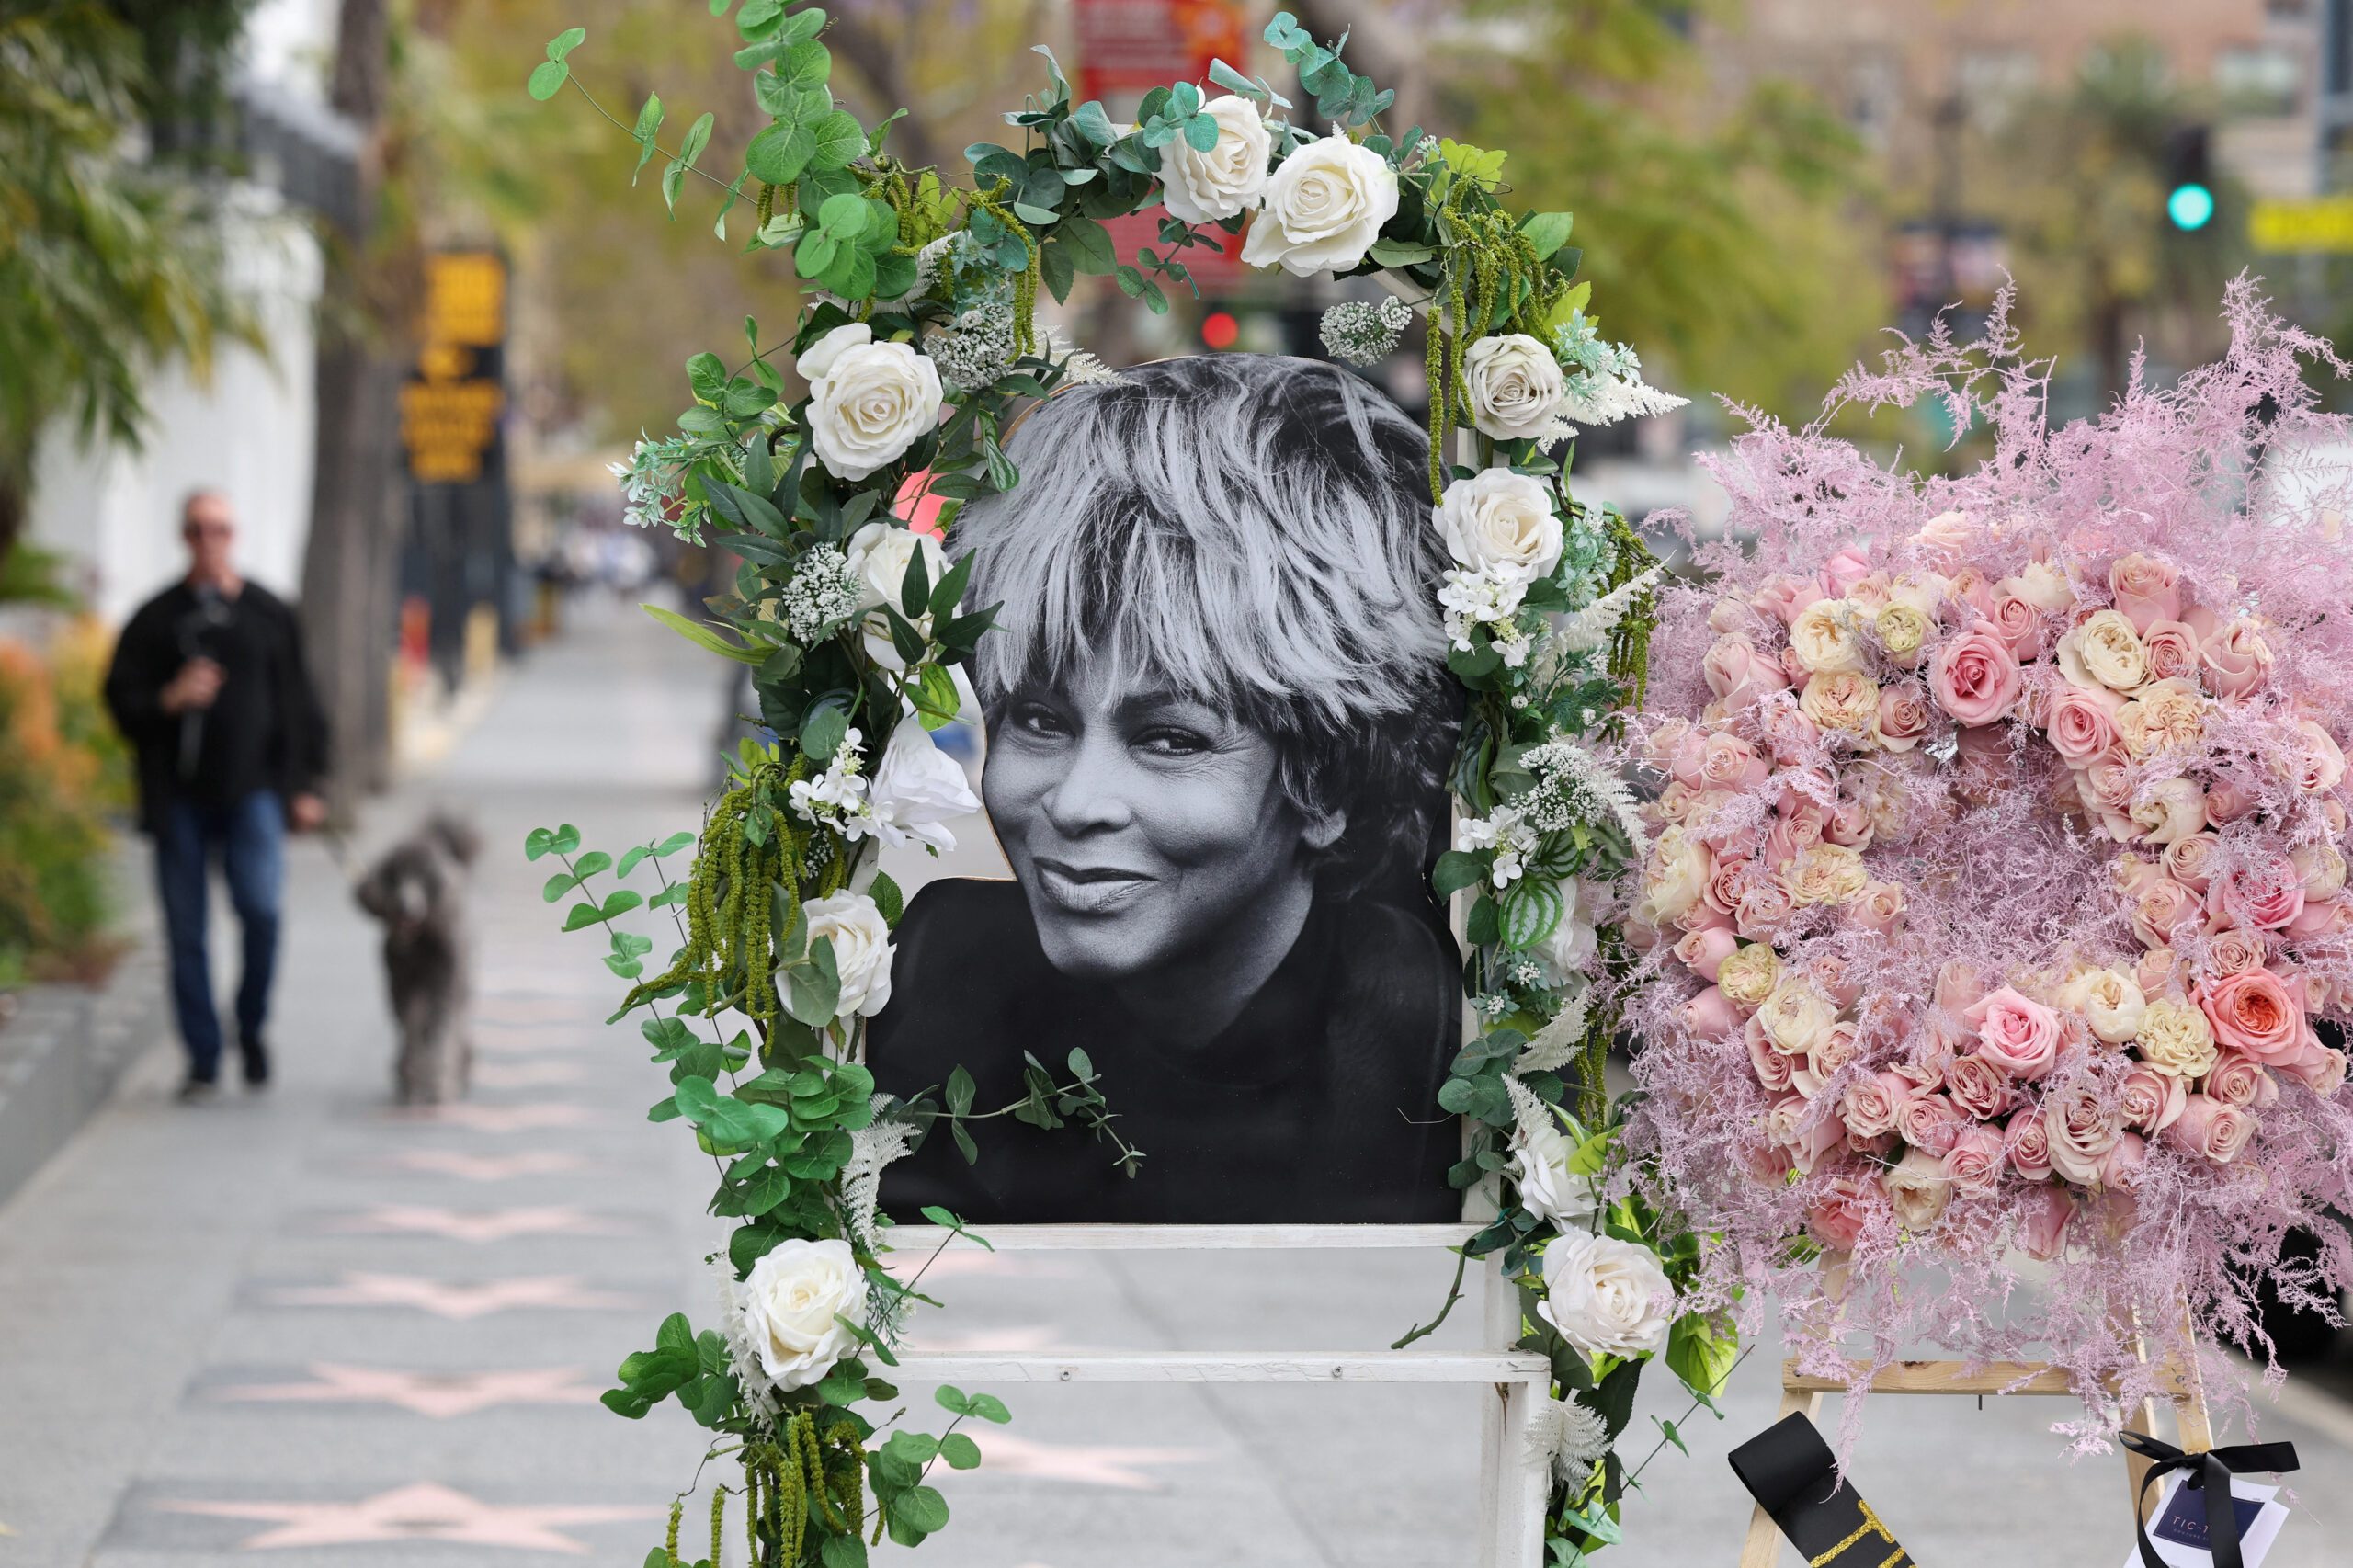 Tributes salute Tina Turner’s music and resilience